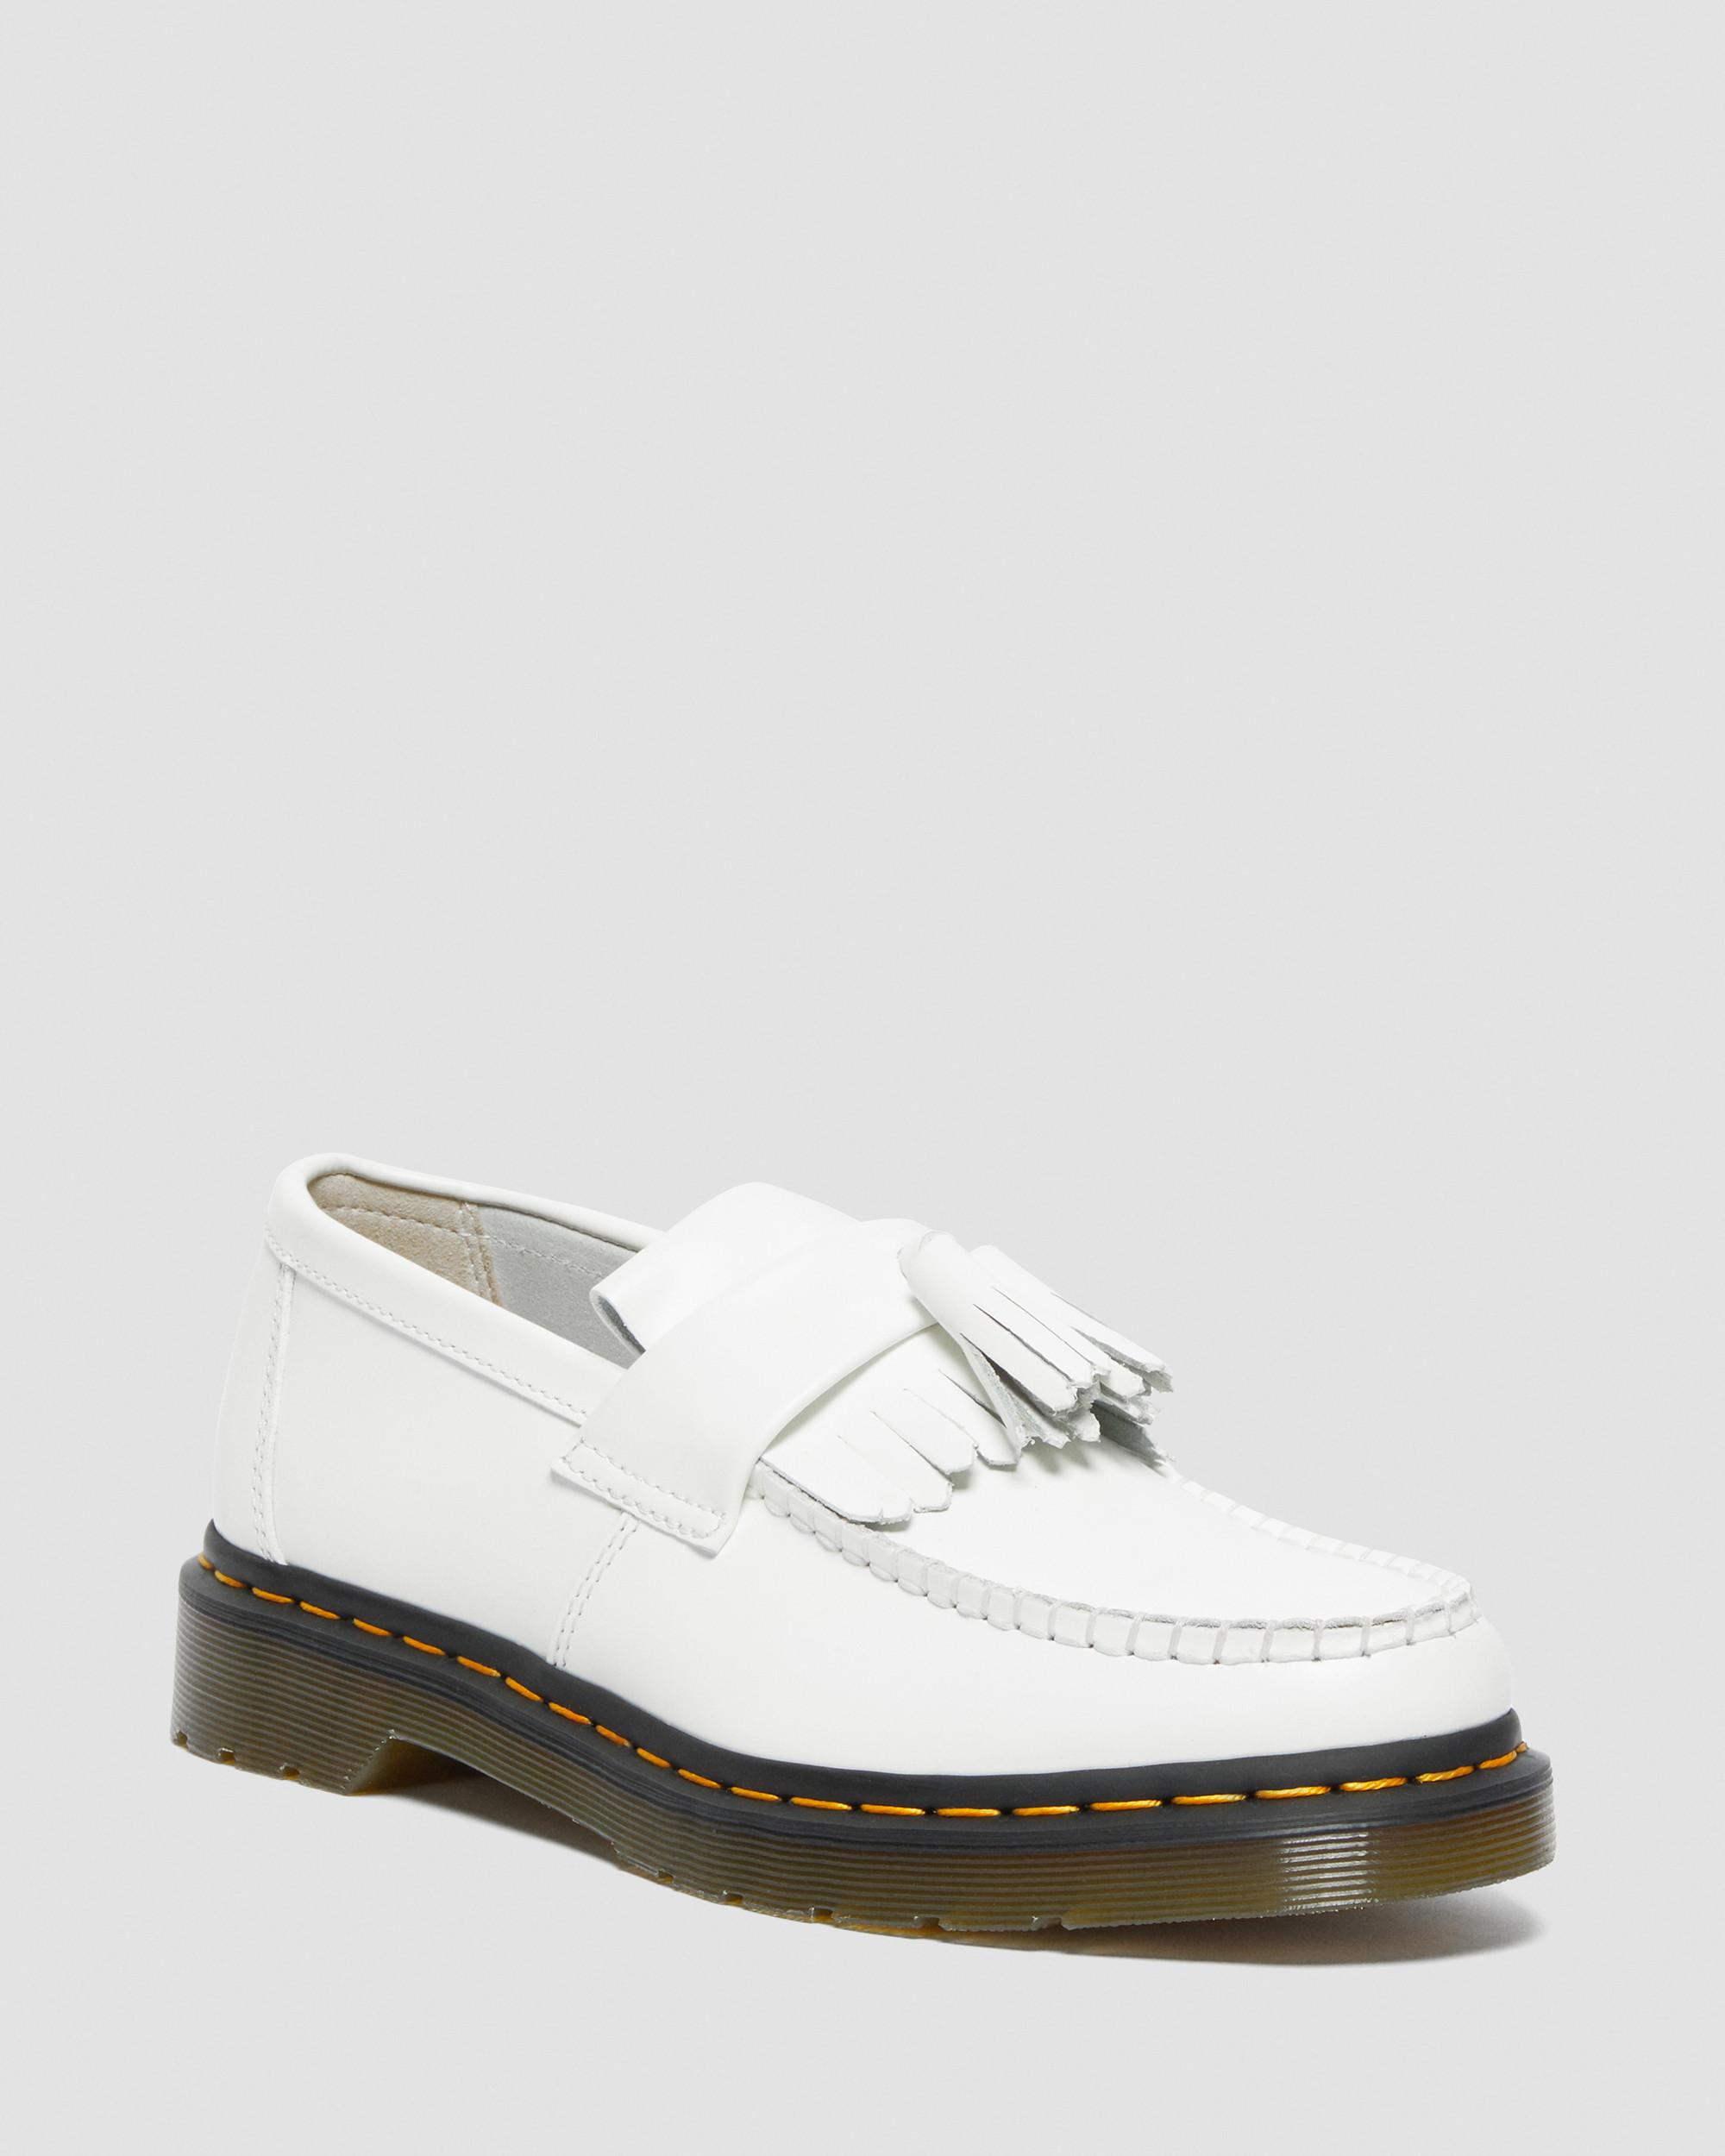 Adrian Yellow Stitch Leather Tassel Loafers, White | Dr. Martens